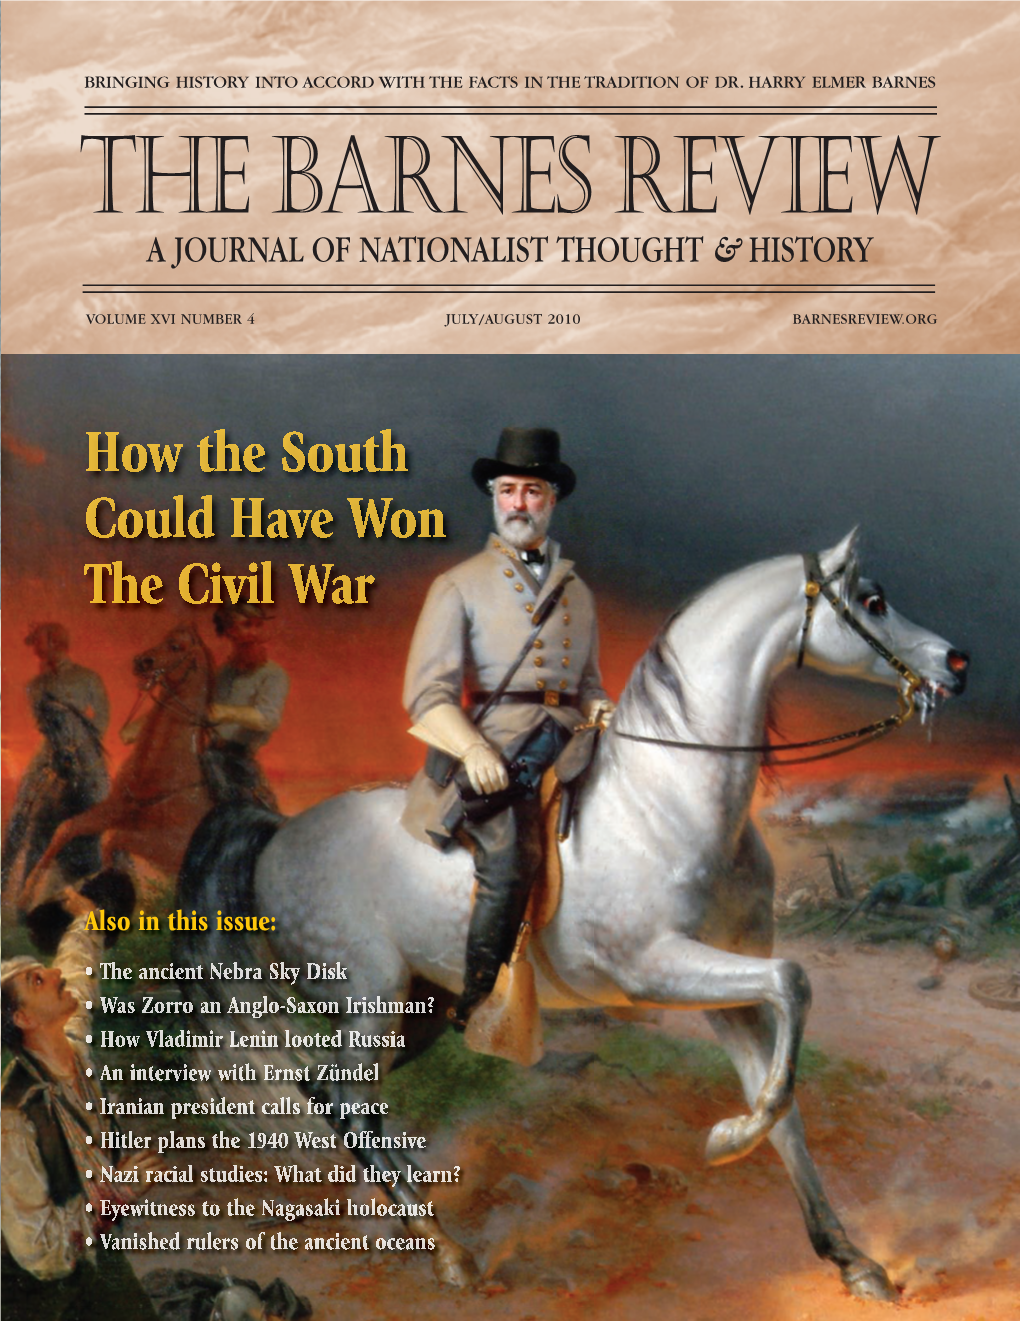 The Barnes Review SOBIBÓR a JOURNAL of NATIONALIST THOUGHT & HISTORY HOLOCAUSTPROPAGANDAANDREALITY VOLUME XVI NUMBER 4 JULY/AUGUST 2010 BARNESREVIEW.ORG